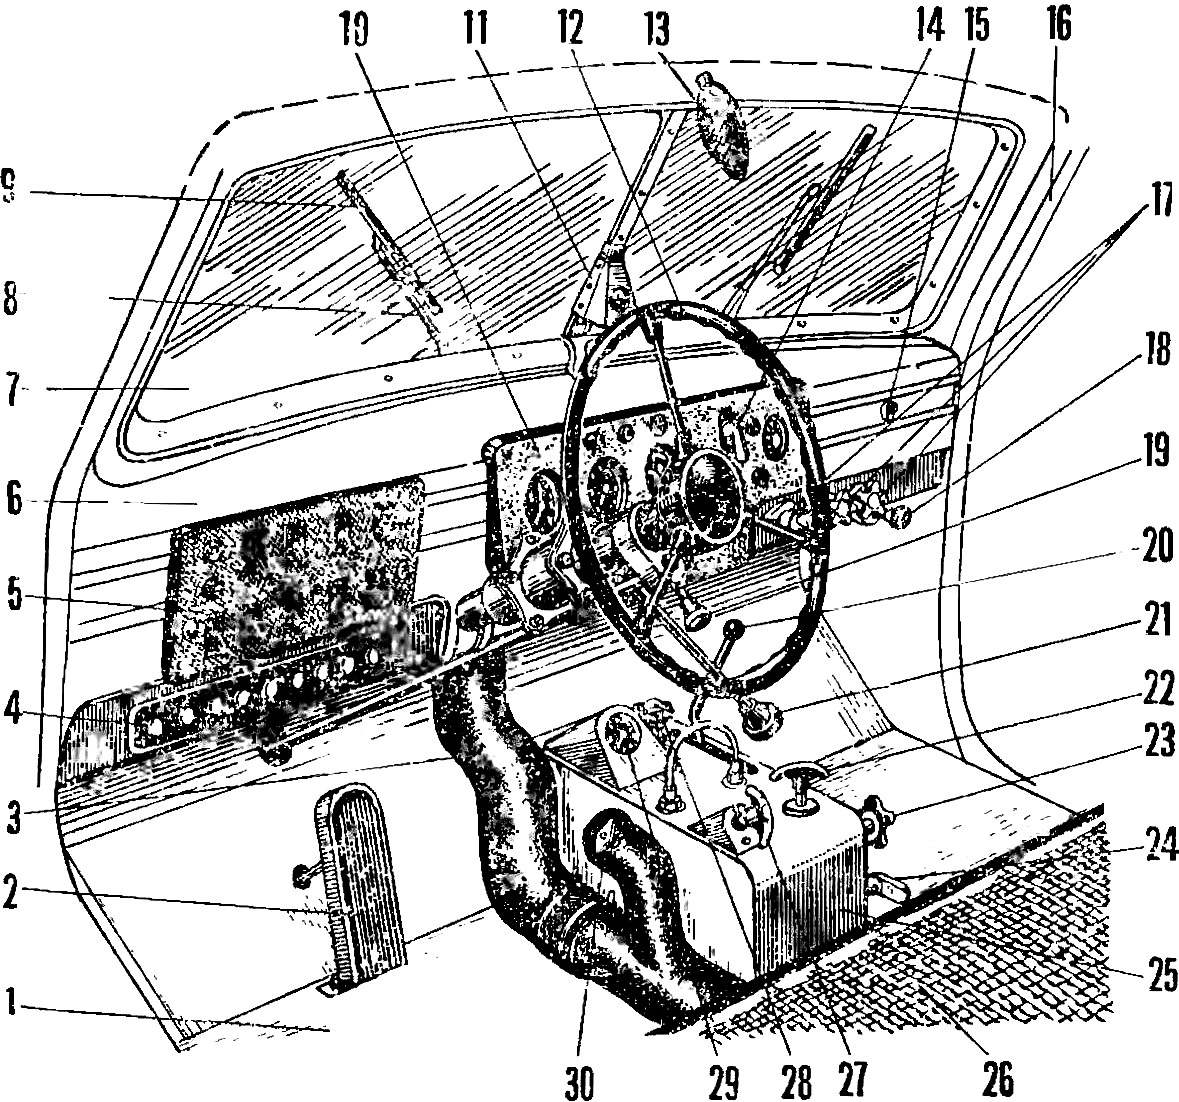 Fig. 3. The placement of the controls in the cab